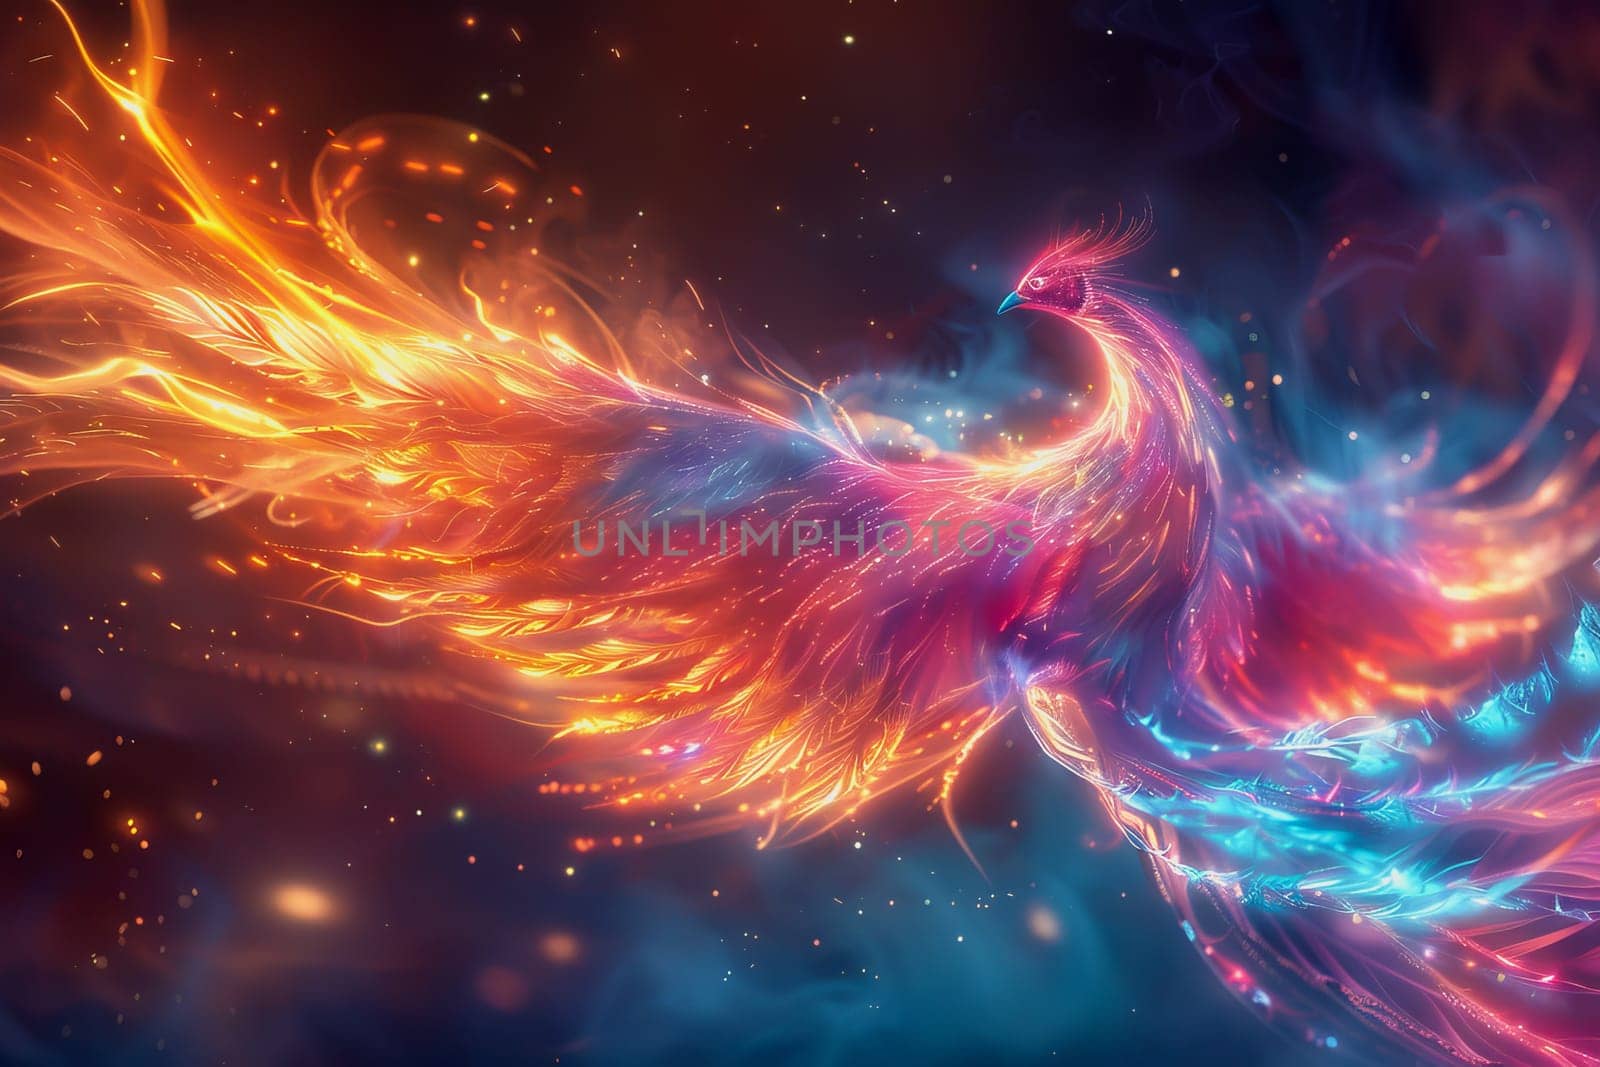 hologram of a transparent mythical phoenix glowing with ethereal radiance. by Manastrong